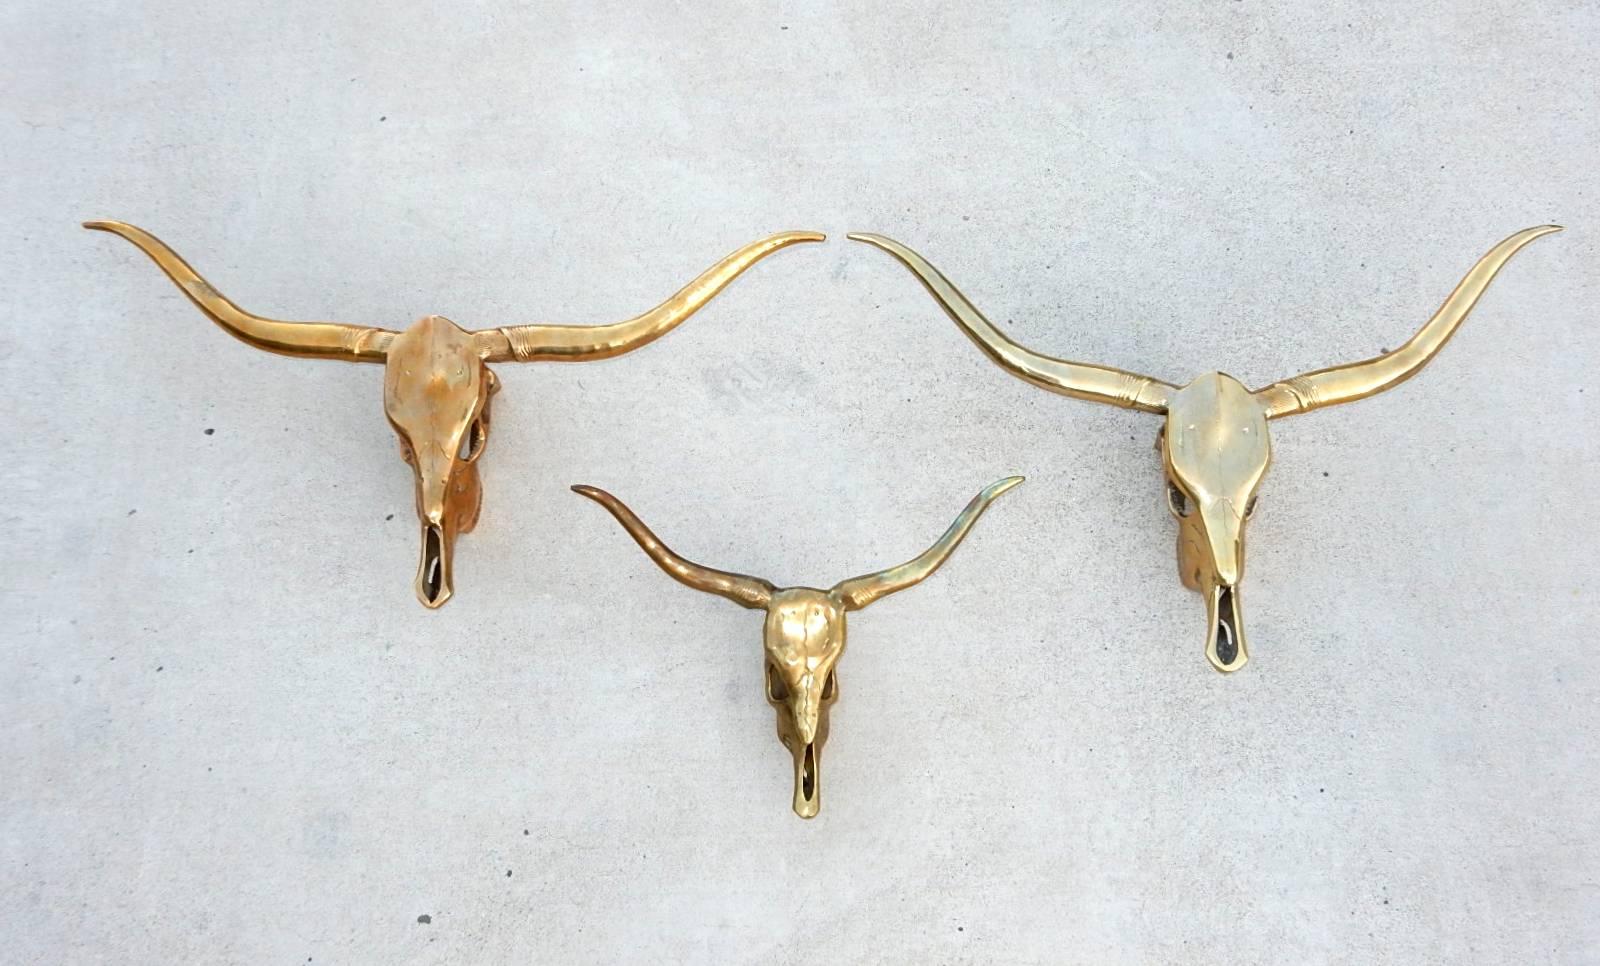 This listing is for three brass sculptures of longhorn steer skulls from the 1970s.
Eclectic home decor pieces.
Largest spans 31 inch across, followed by 28 inch and 16 inch across.
 